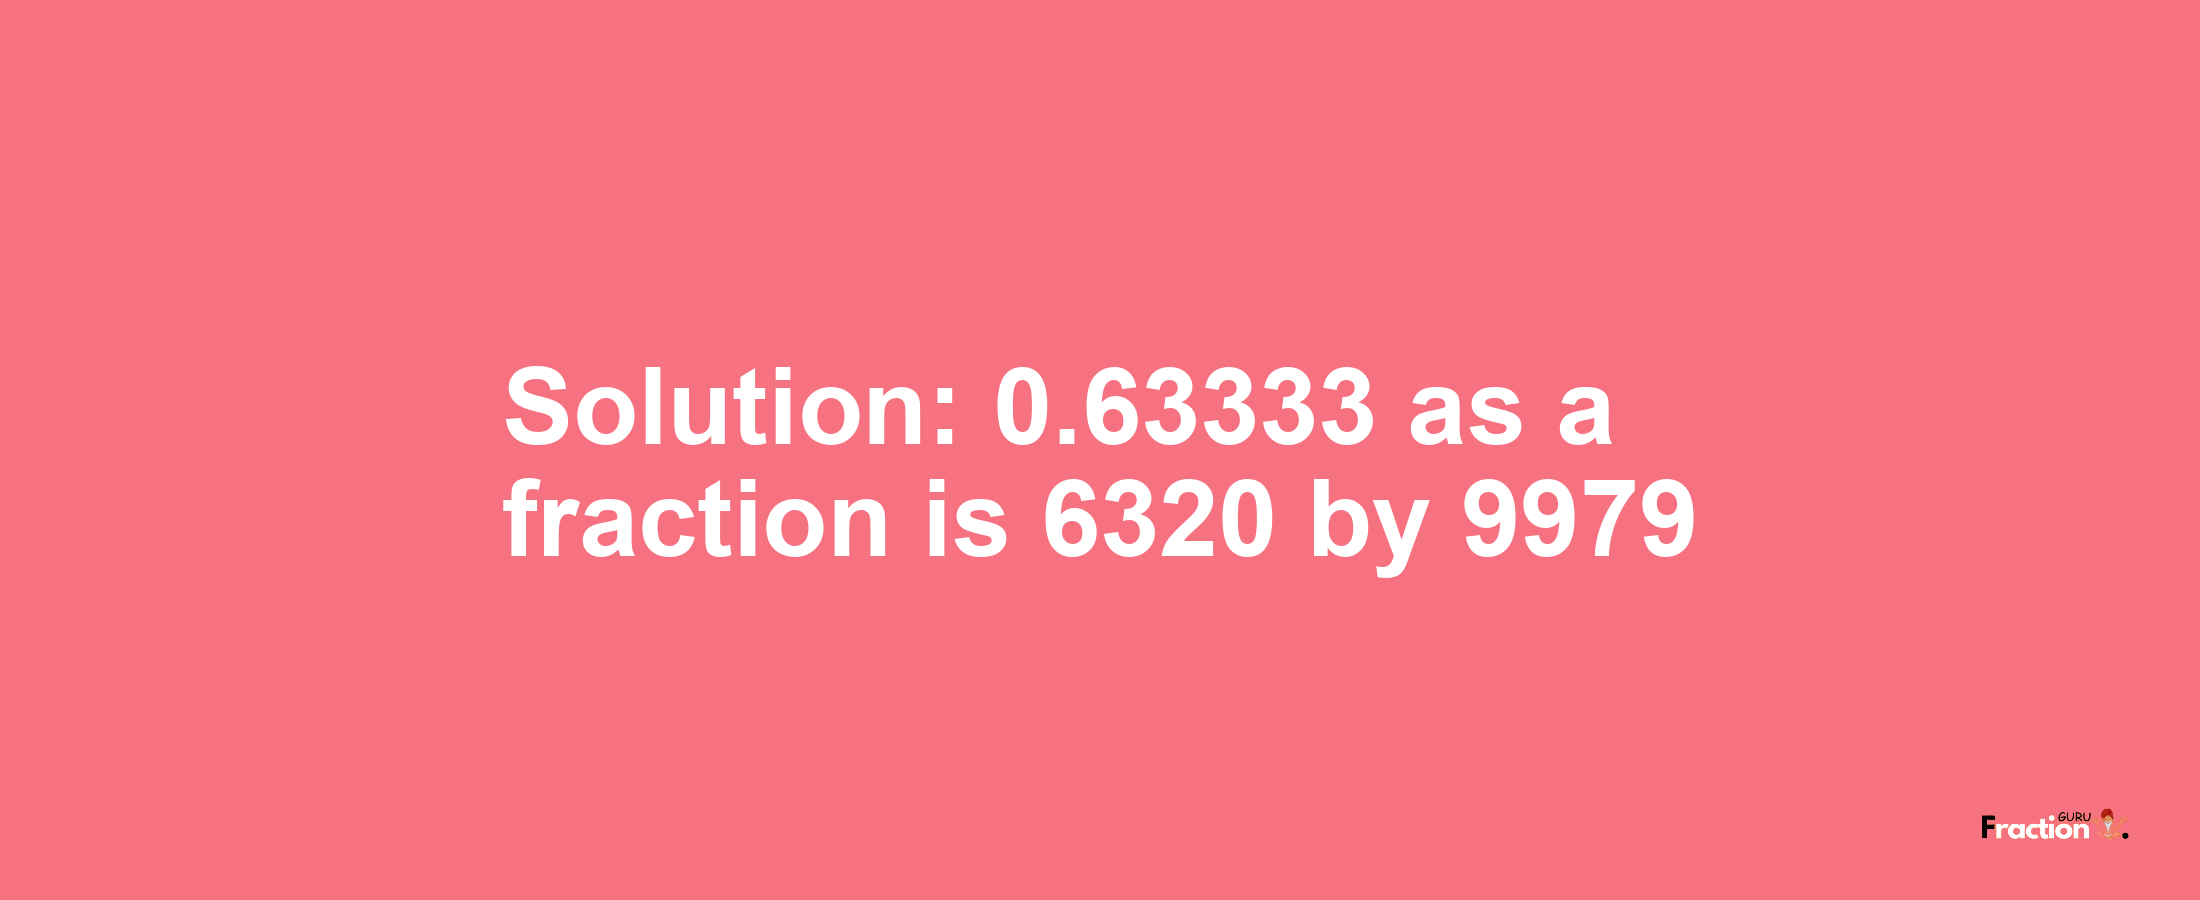 Solution:0.63333 as a fraction is 6320/9979